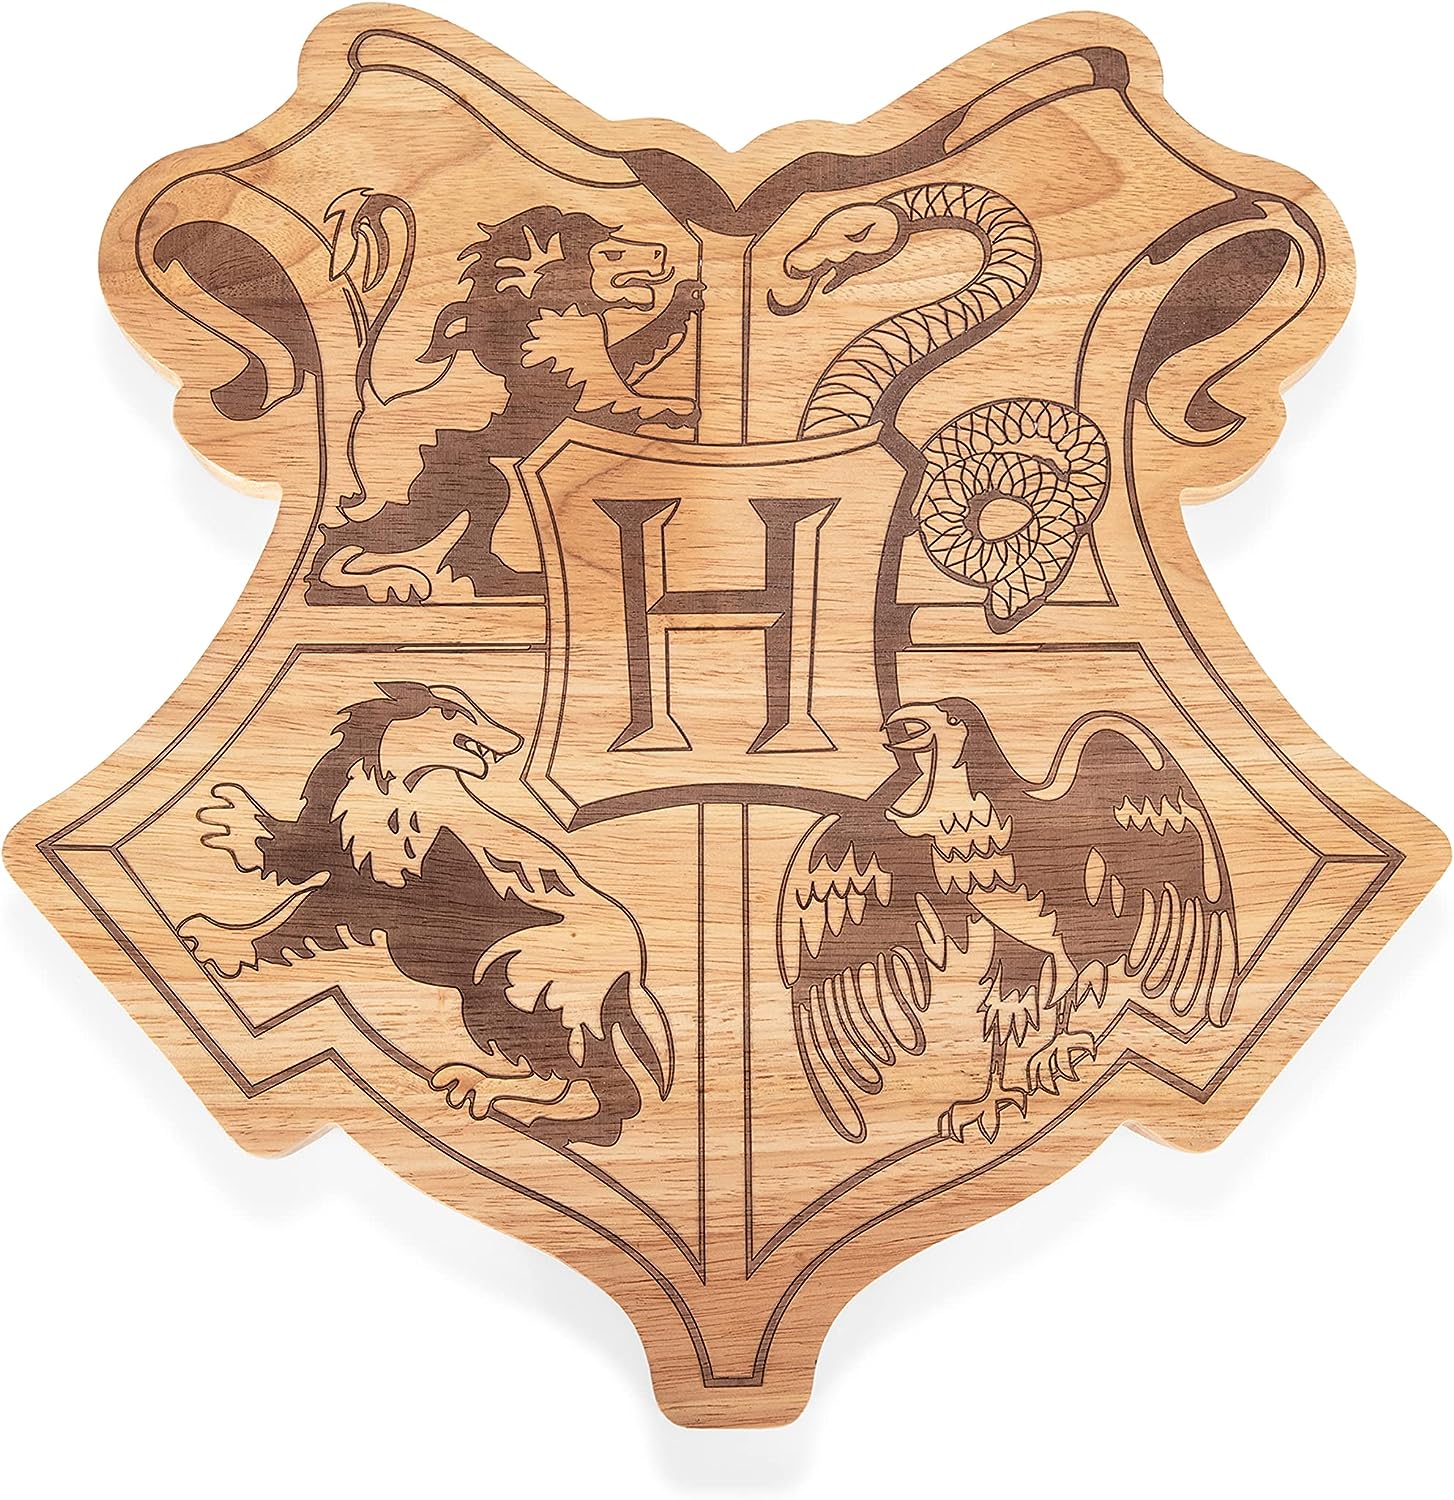 Toscana Harry Potter Hogwarts Serving Board, Charcuterie Board, Serving Tray, (Parawood)